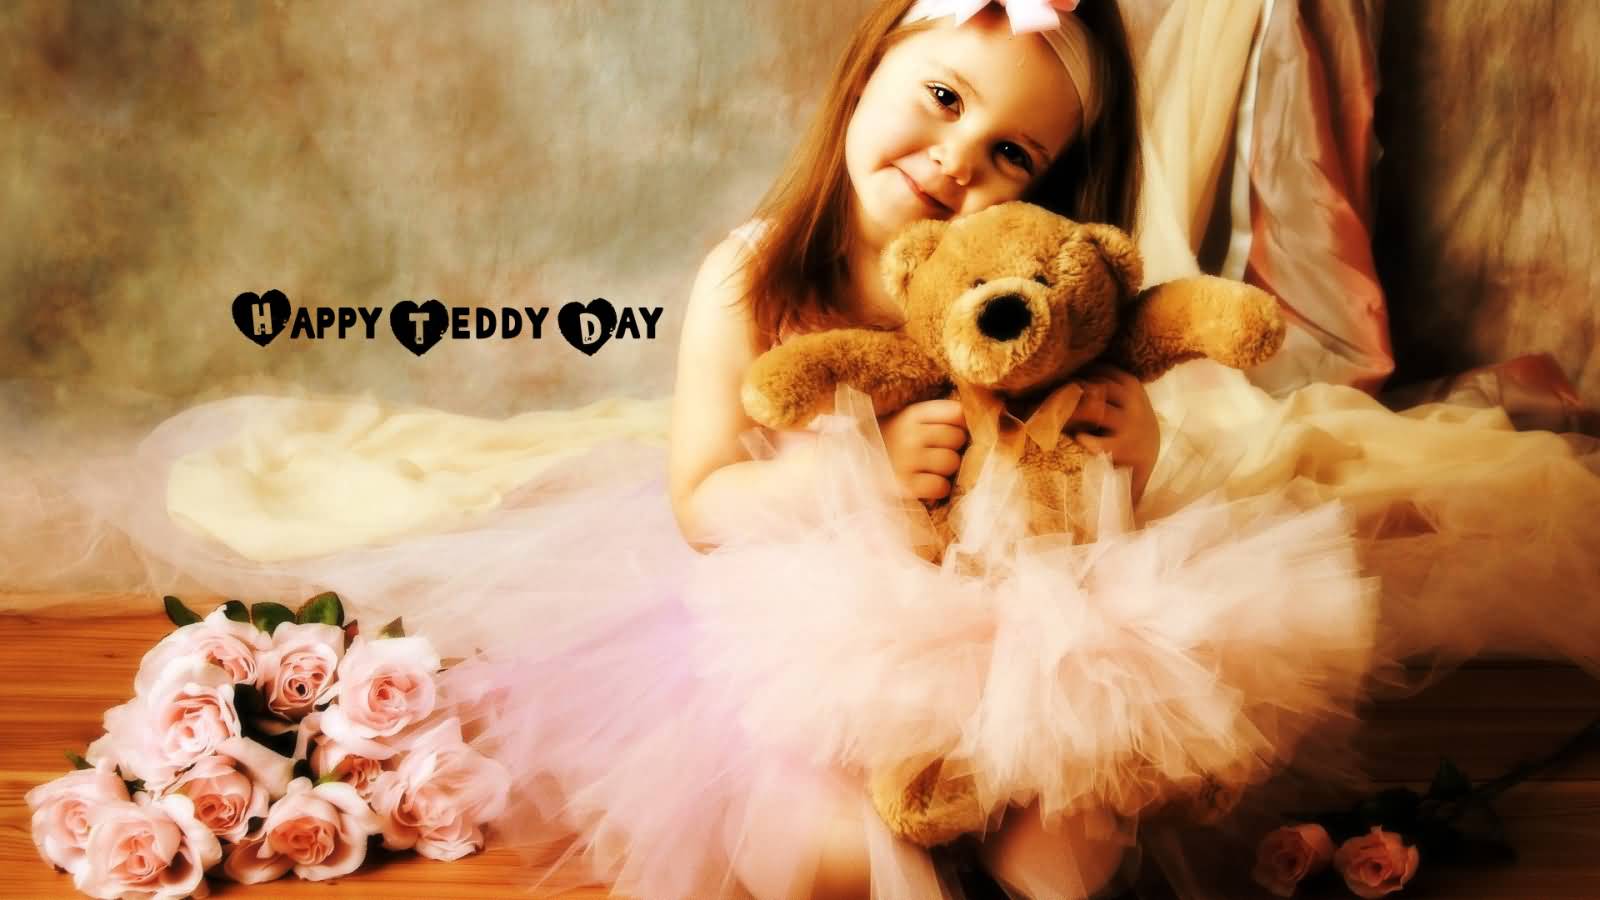 Happy Teddy Day Wishes Wallpaper